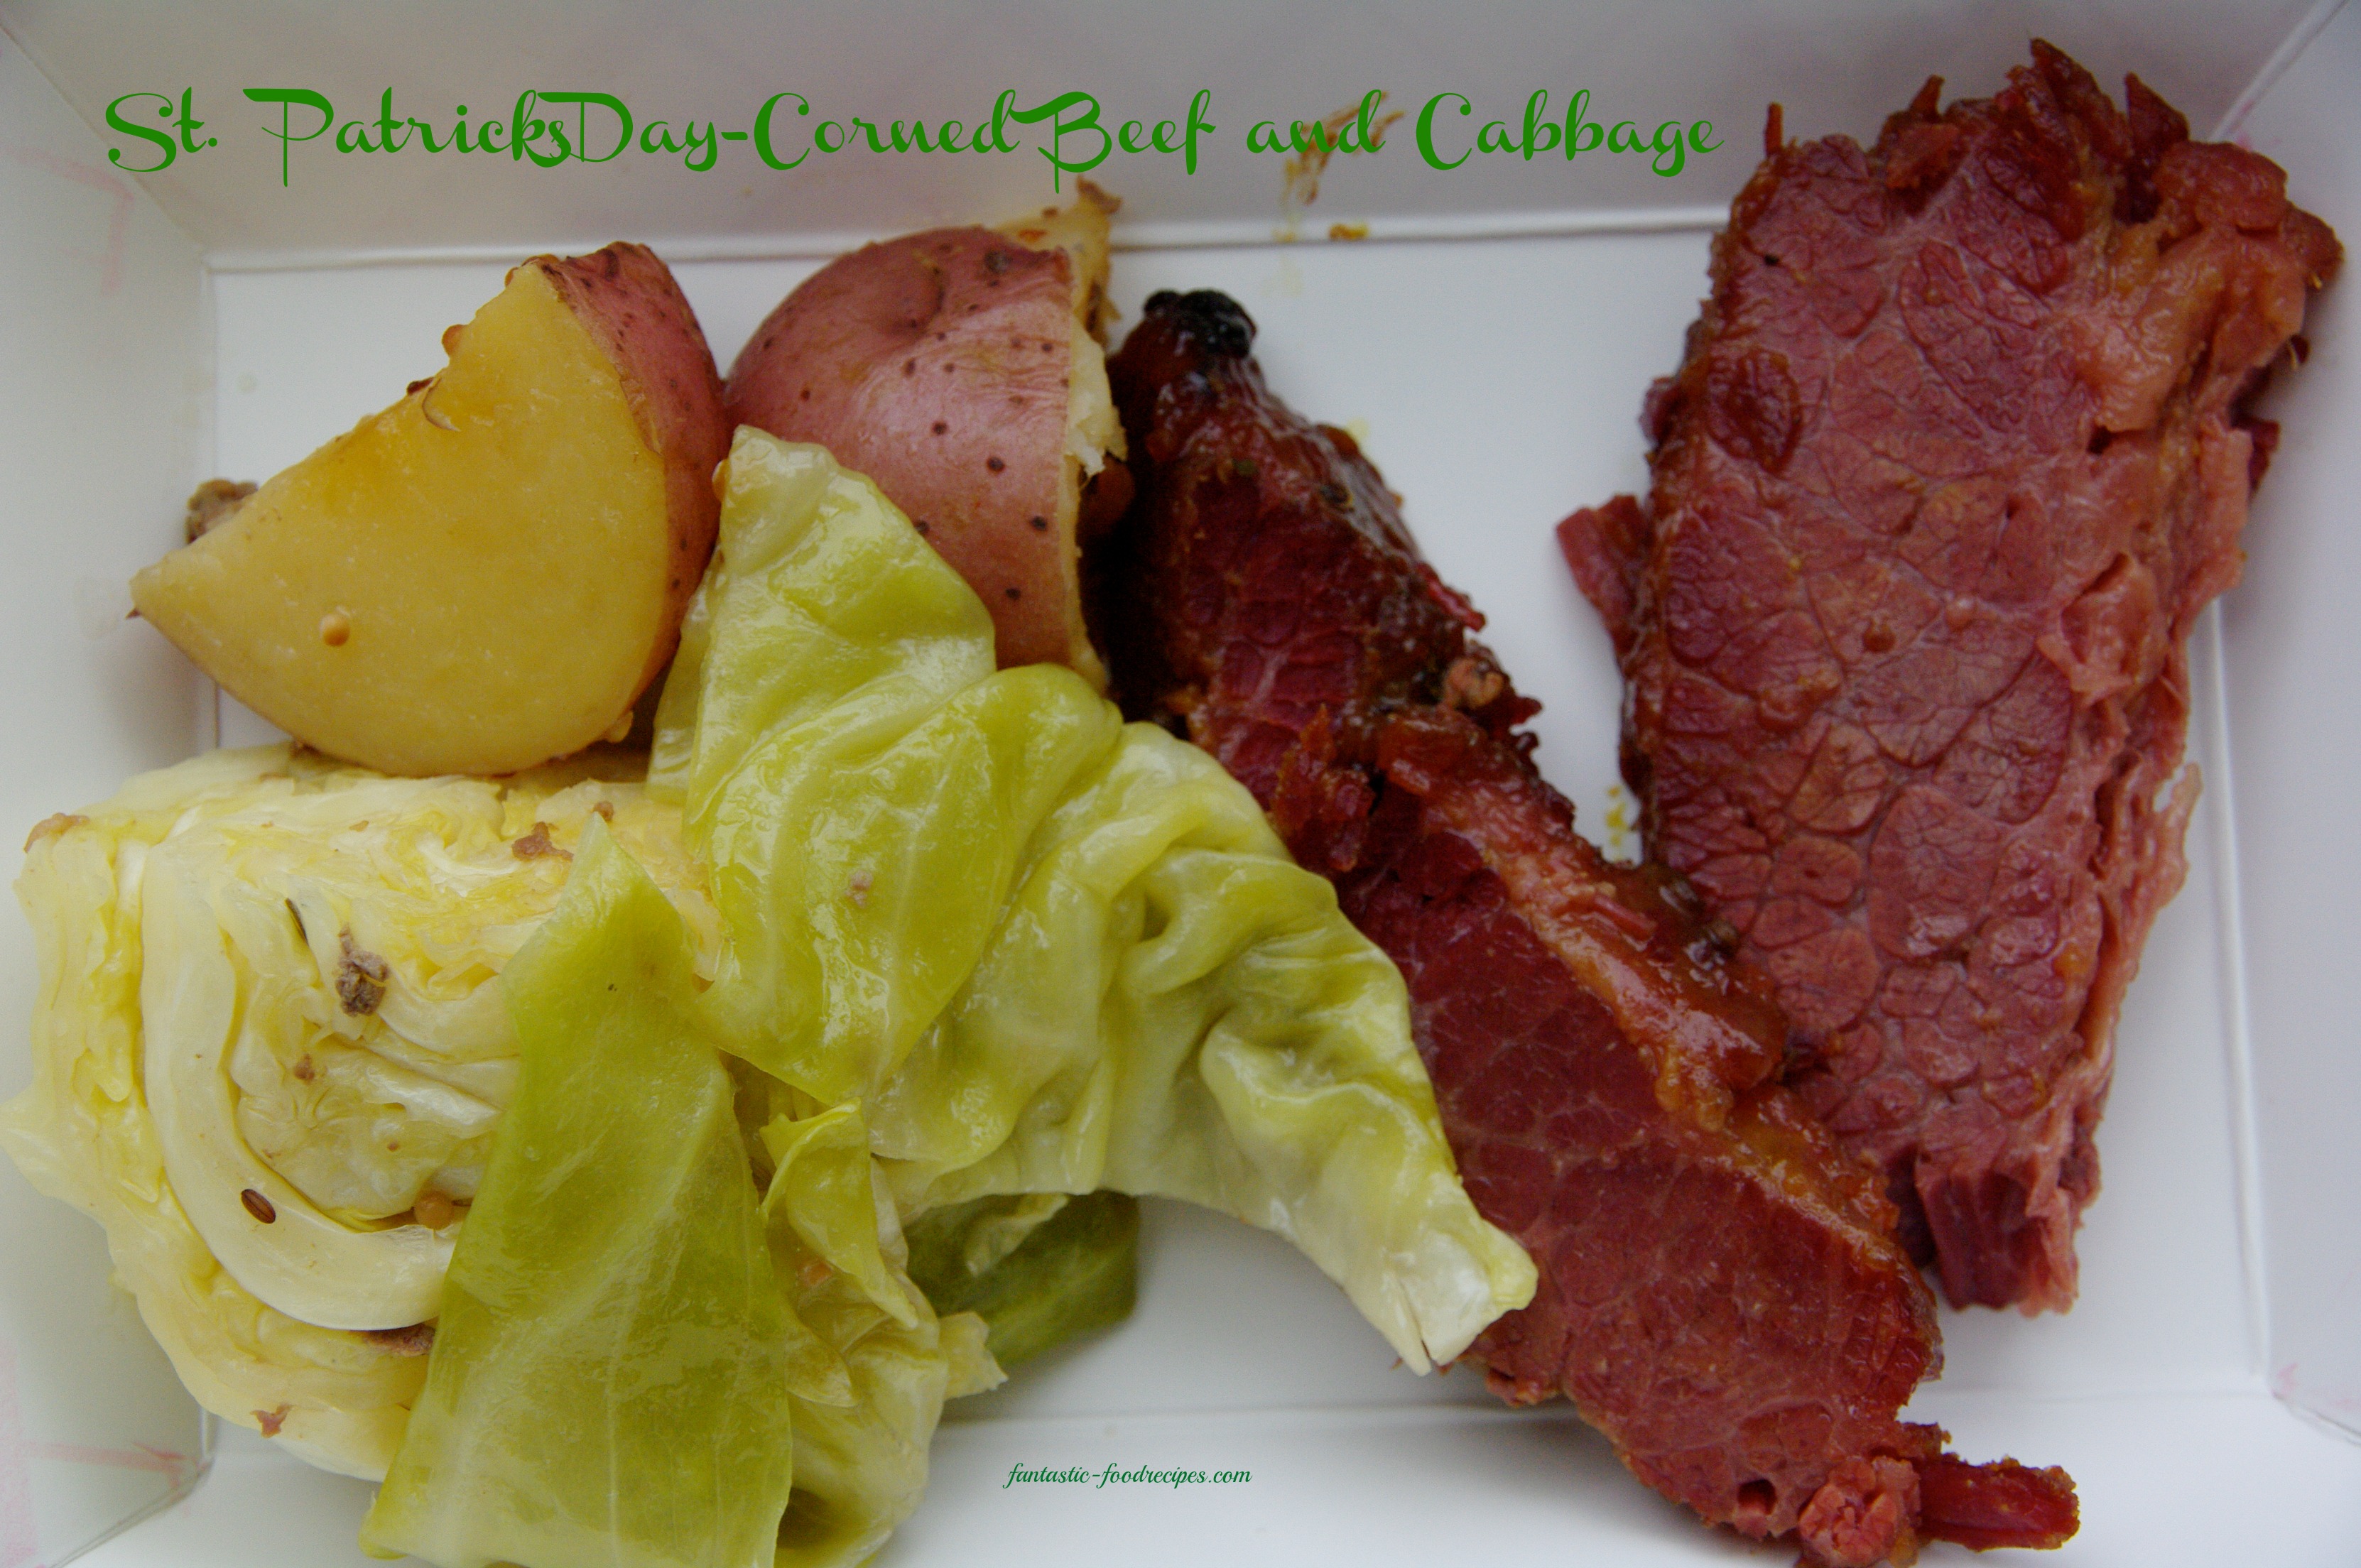 St. Patrick`s Day Corned Beef and Cabbage<p><!-- Google Ads Injected by Adsense Explosion 1.1.5 --><div class="adsxpls" id="adsxpls1" style="padding:7px; display: block; margin-left: auto; margin-right: auto; text-align: center;"><!-- AdSense Plugin Explosion num: 1 --><script type="text/javascript"><!--

google_ad_client = "pub-0699383648386361"; google_alternate_color = "FFFFFF";
google_ad_width = 234; google_ad_height = 60; google_ad_format = "234x60_as";
google_ad_type = "text_image";
google_ad_channel ="2528992444"; google_color_border = "336699";
google_color_link = "0000FF"; google_color_bg = "FFFFFF";
google_color_text = "000000"; google_color_url = "008000";
google_ui_features = "rc:6"; //--></script>
<script type="text/javascript" src="http://pagead2.googlesyndication.com/pagead/show_ads.js"></script></div></p>